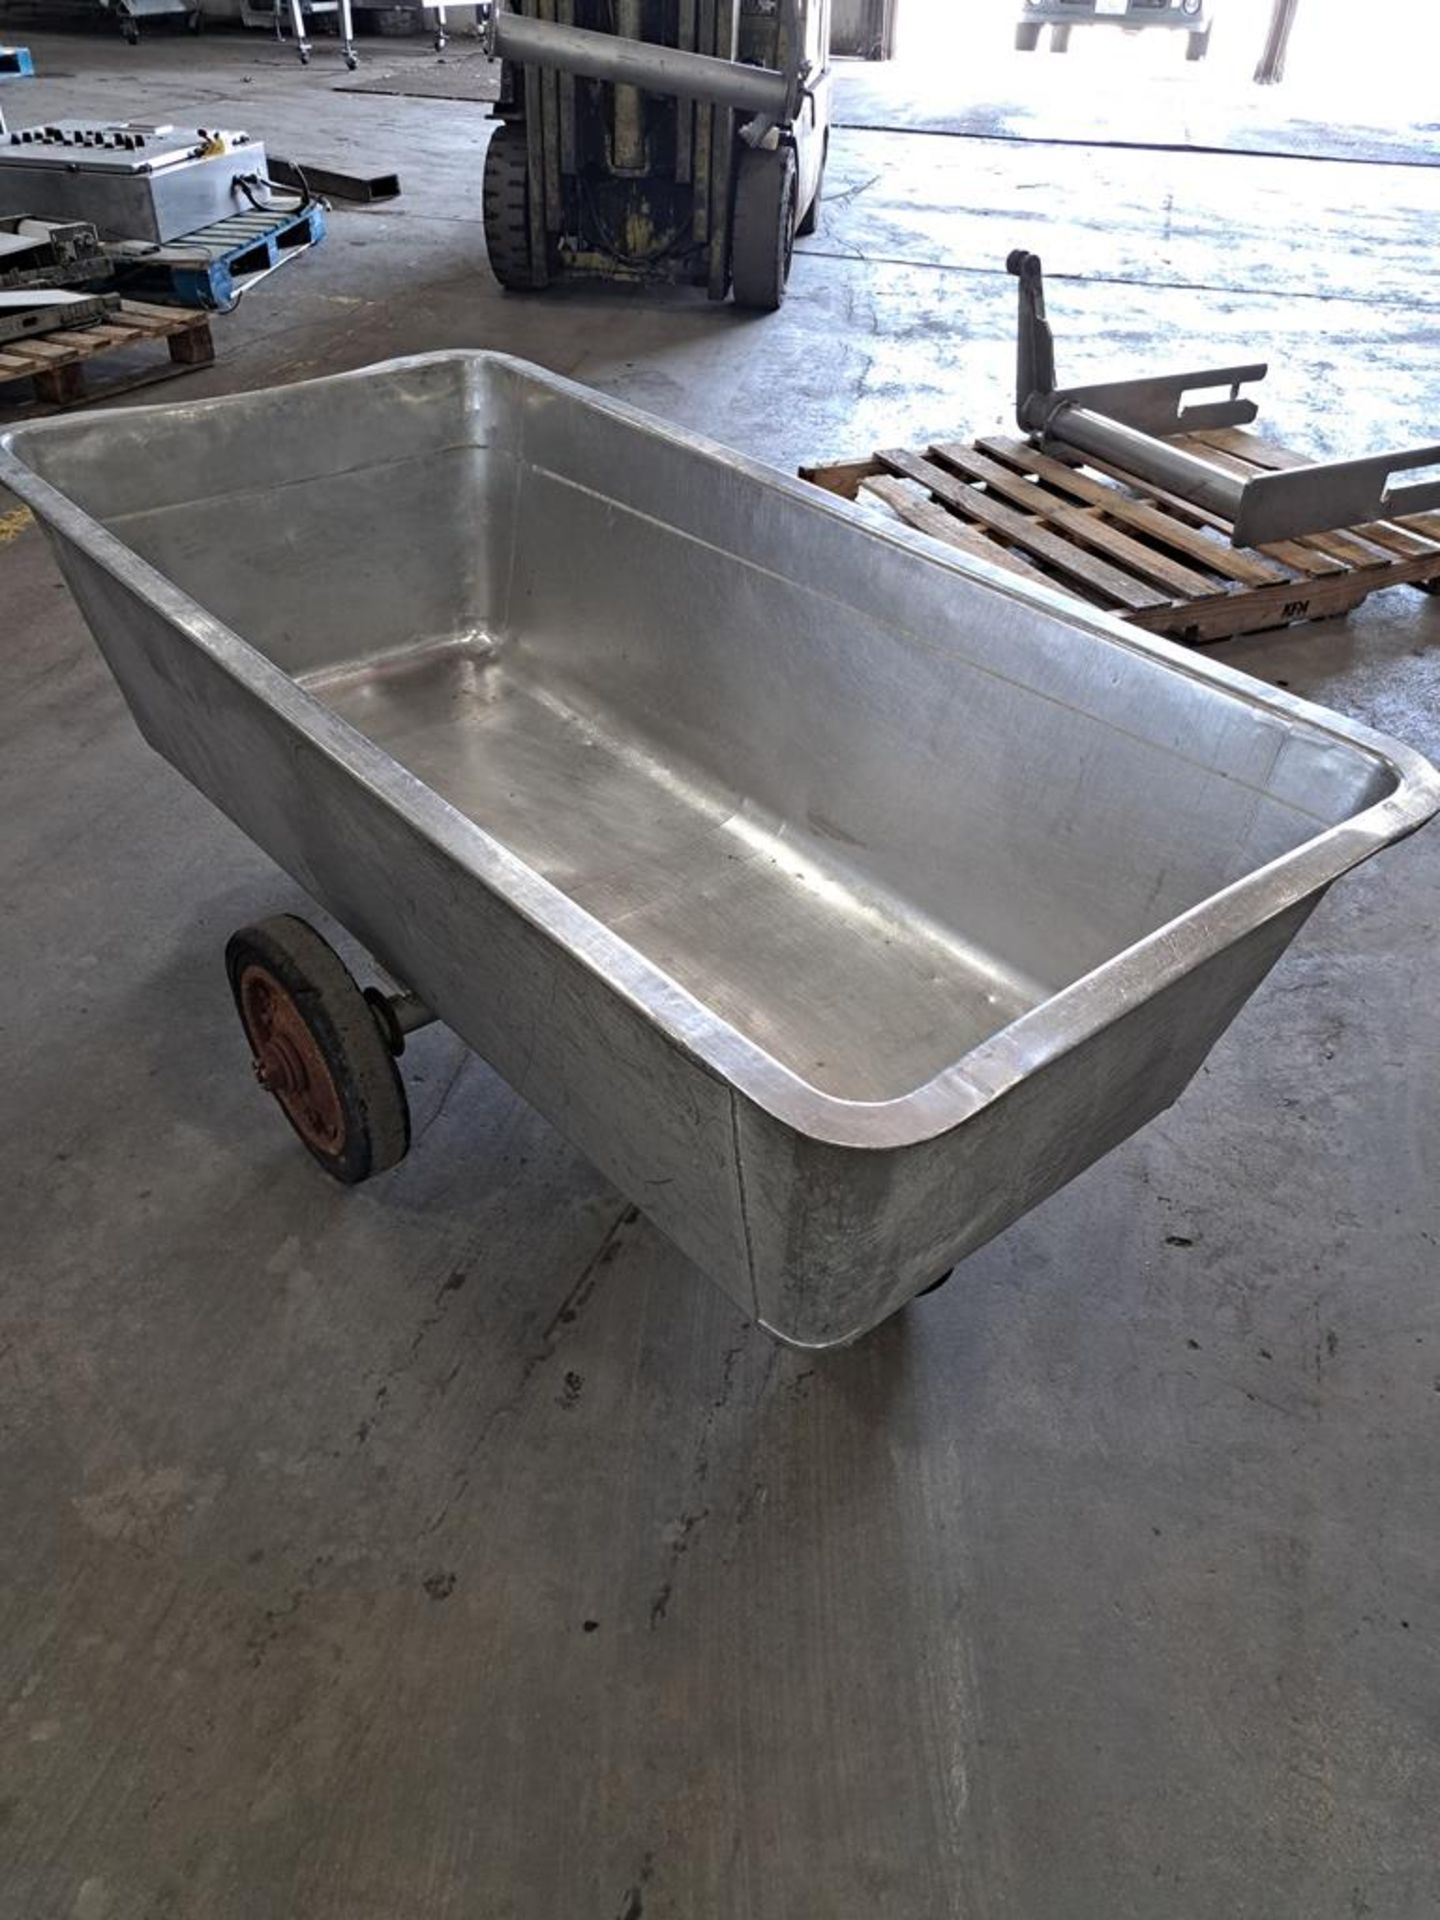 Stainless Steel Meat Truck, 27 1/2" Wide X 58" Long X 16" Deep, Located In Plano, IL (Required - Image 2 of 2